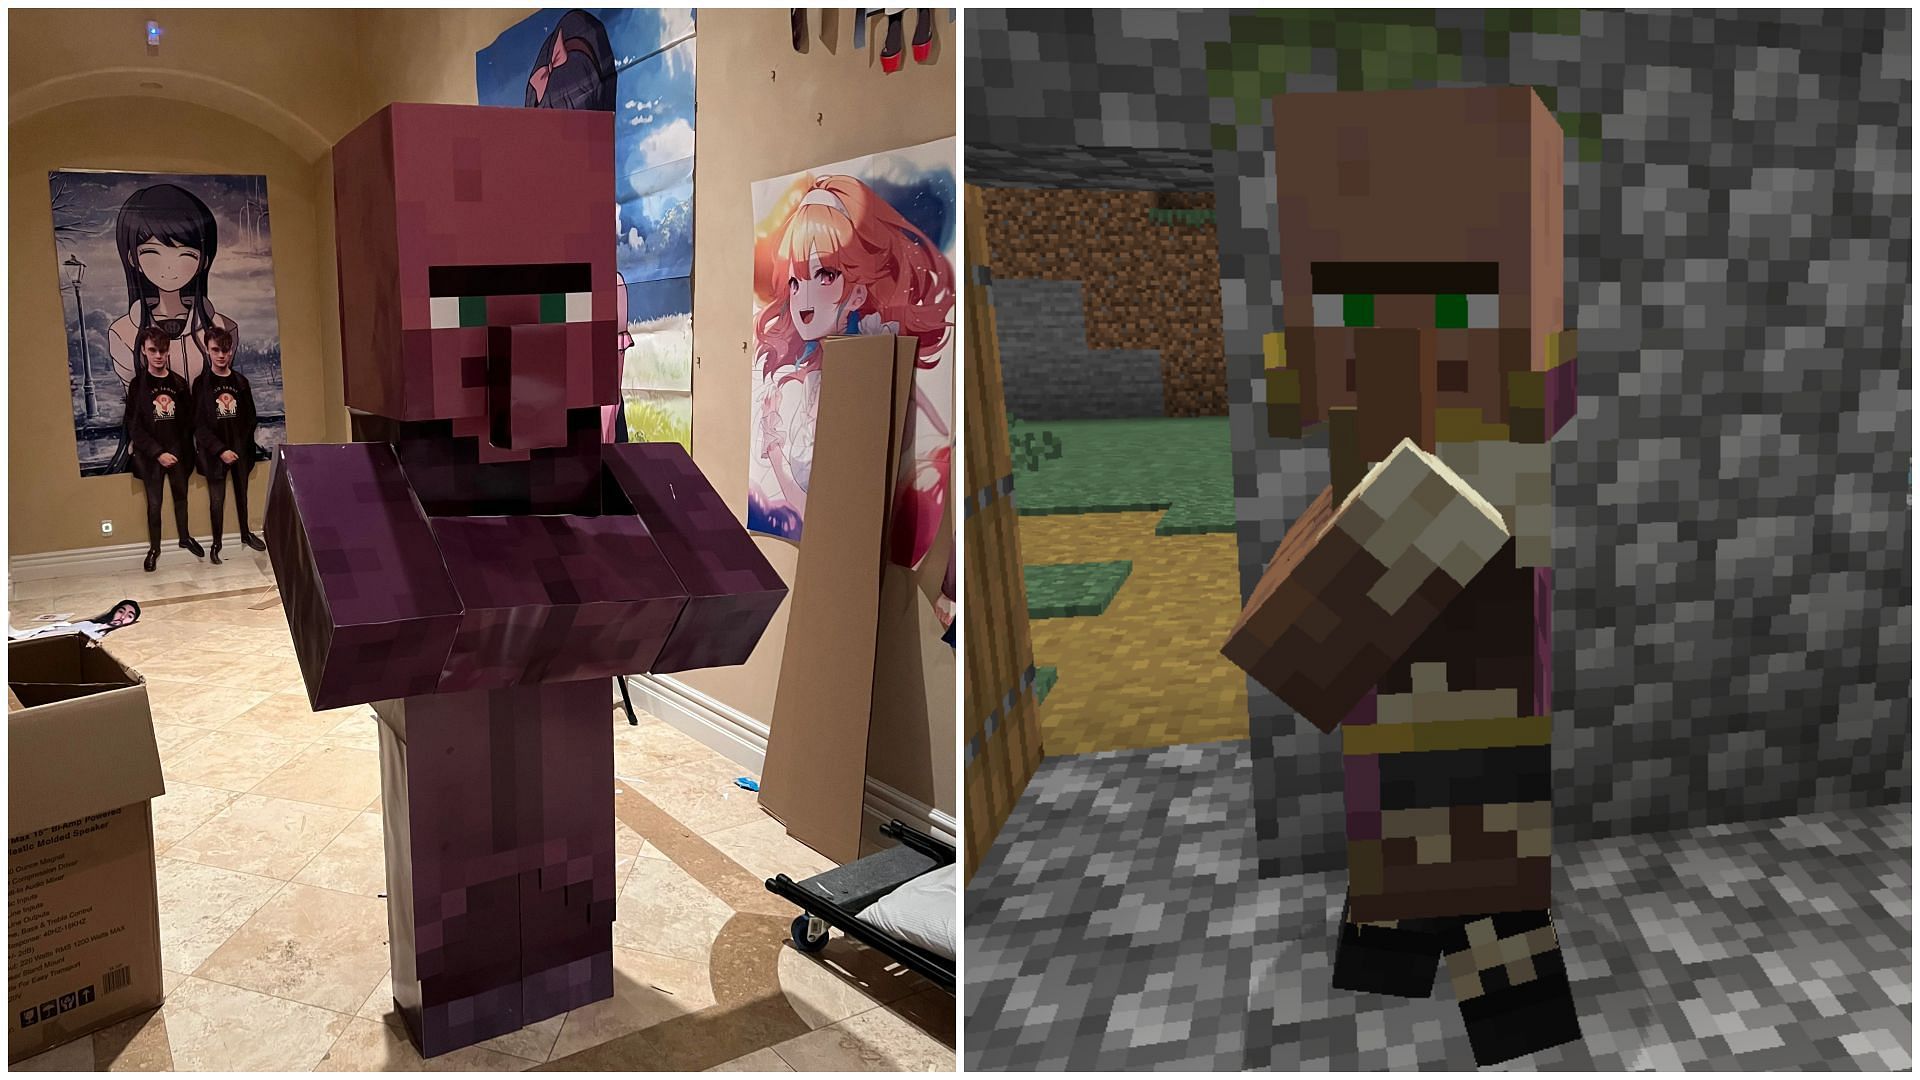 Minecraft Redditor creates a life-size villager model out of paper (Image via Sportskeeda)